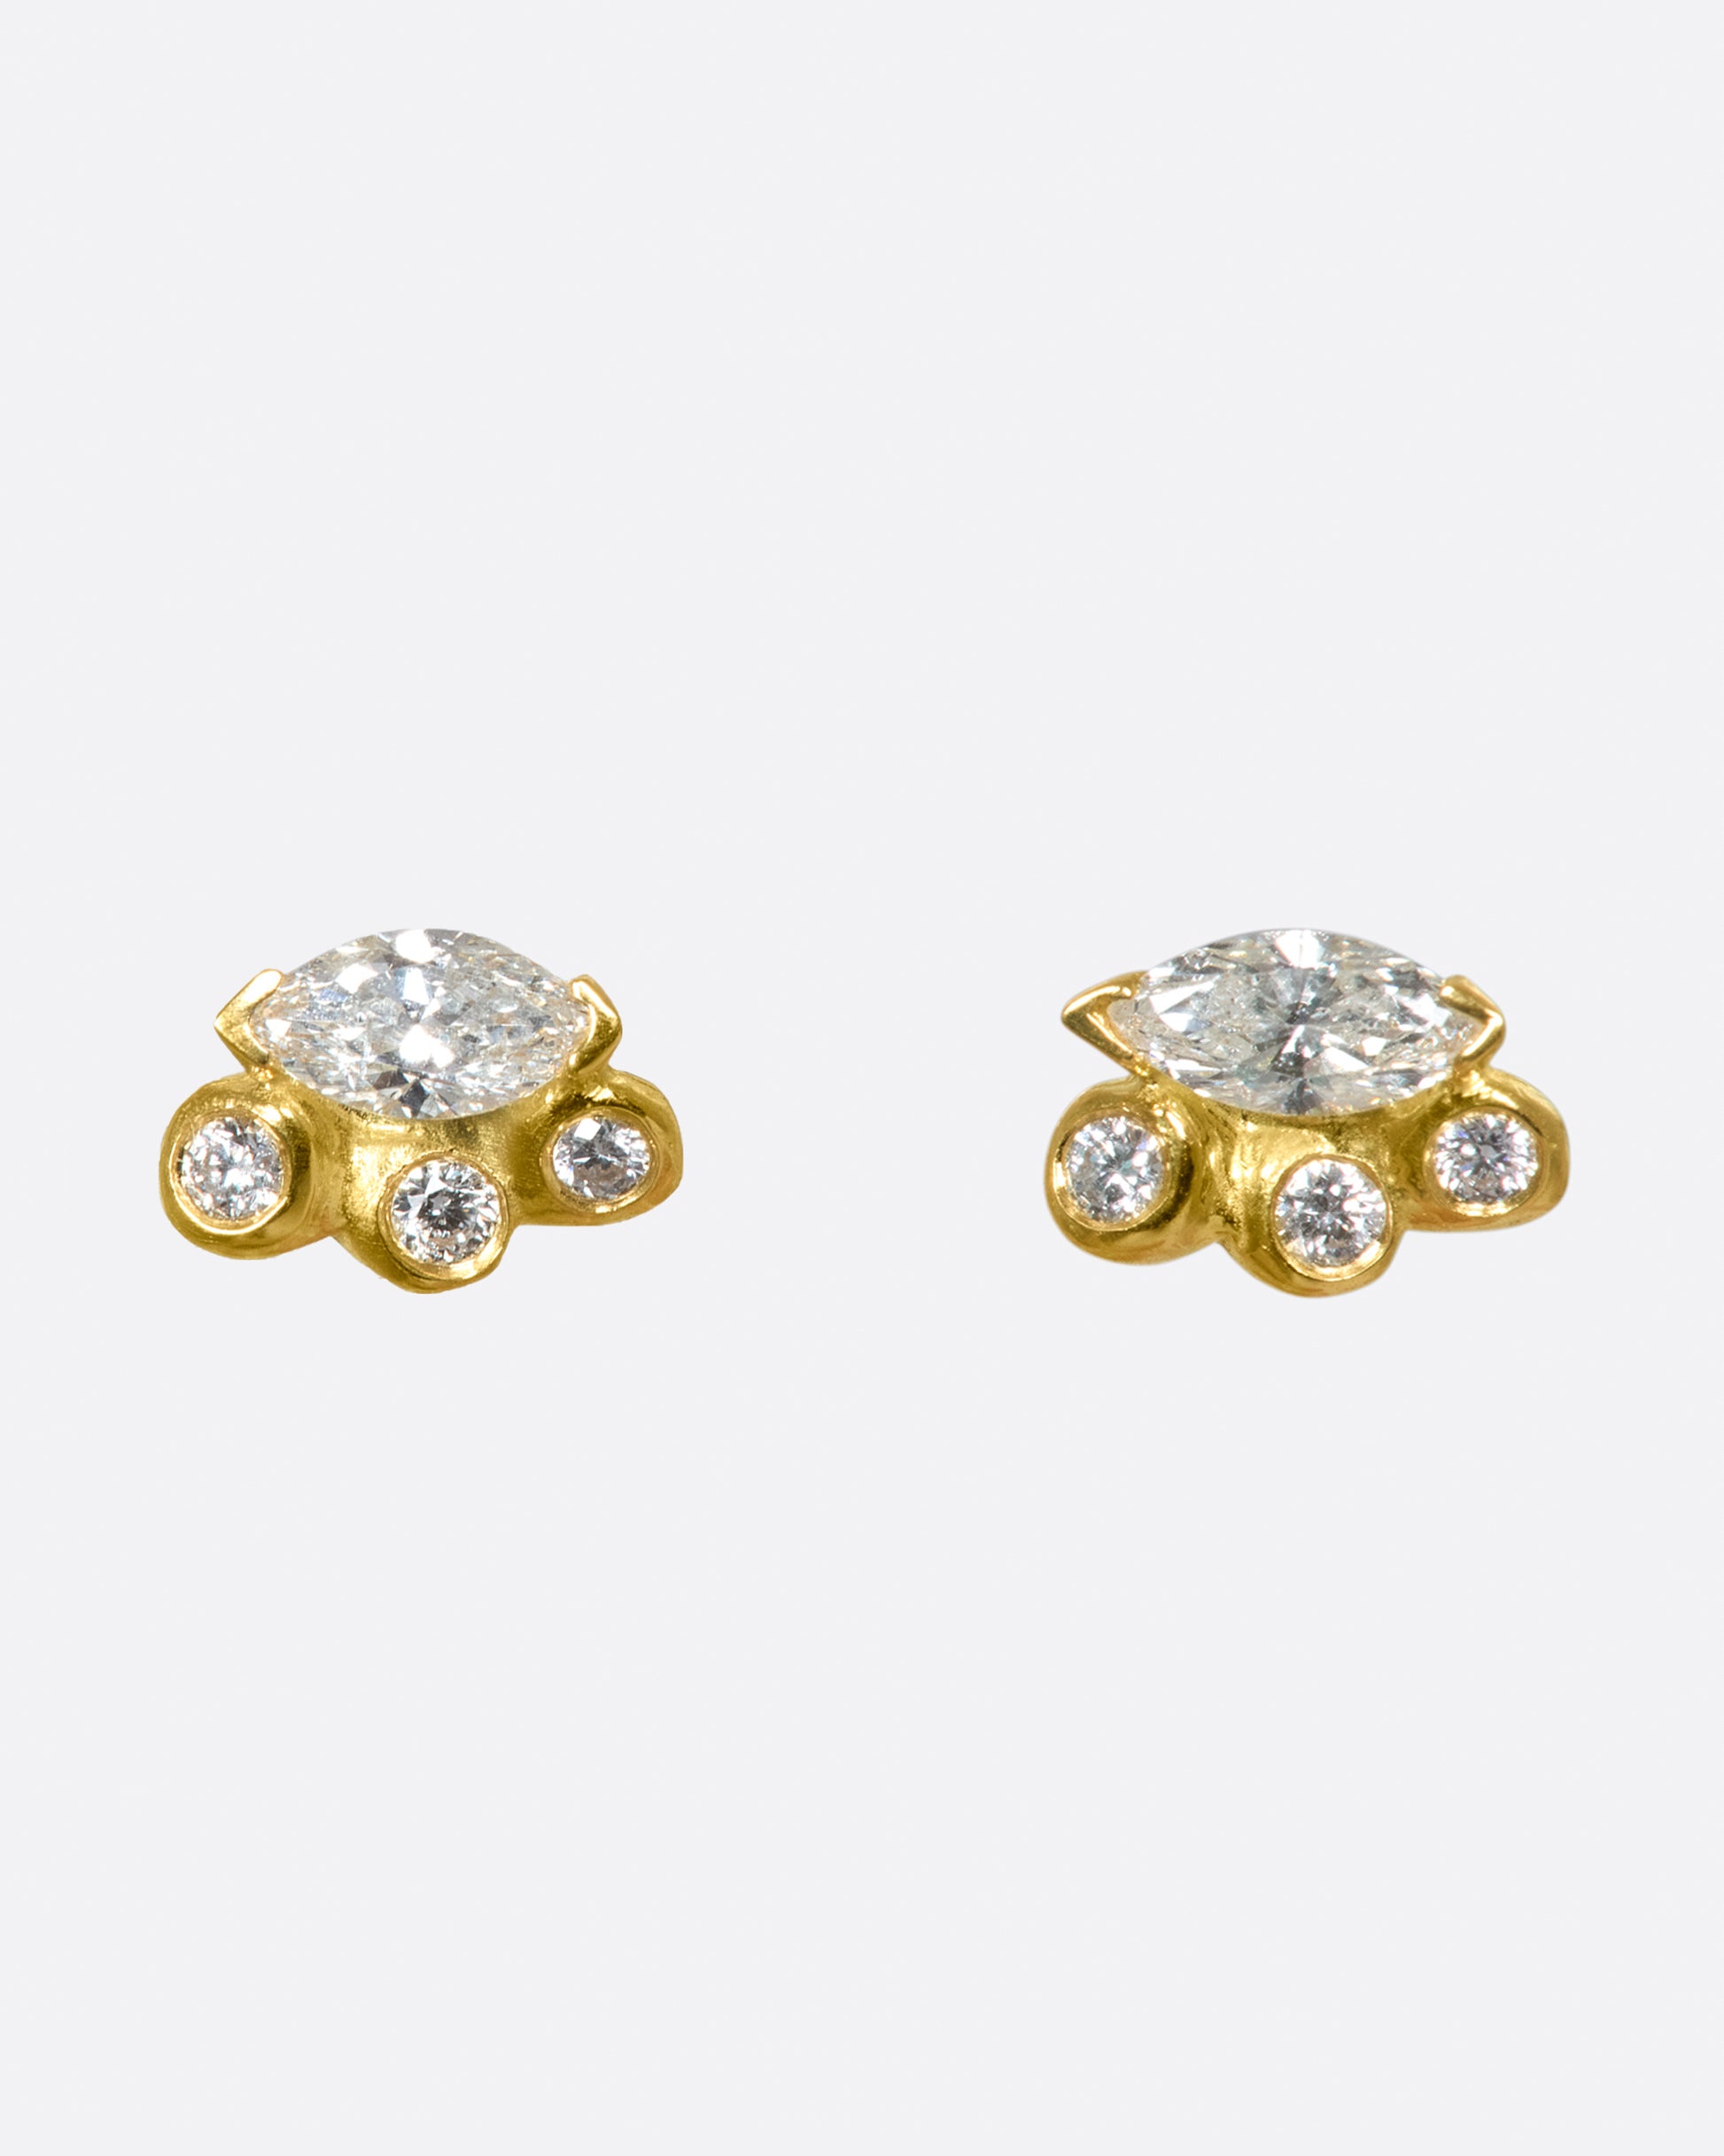 A pair of cluster studs featuring large marquise diamonds and smaller round diamonds along their edges.